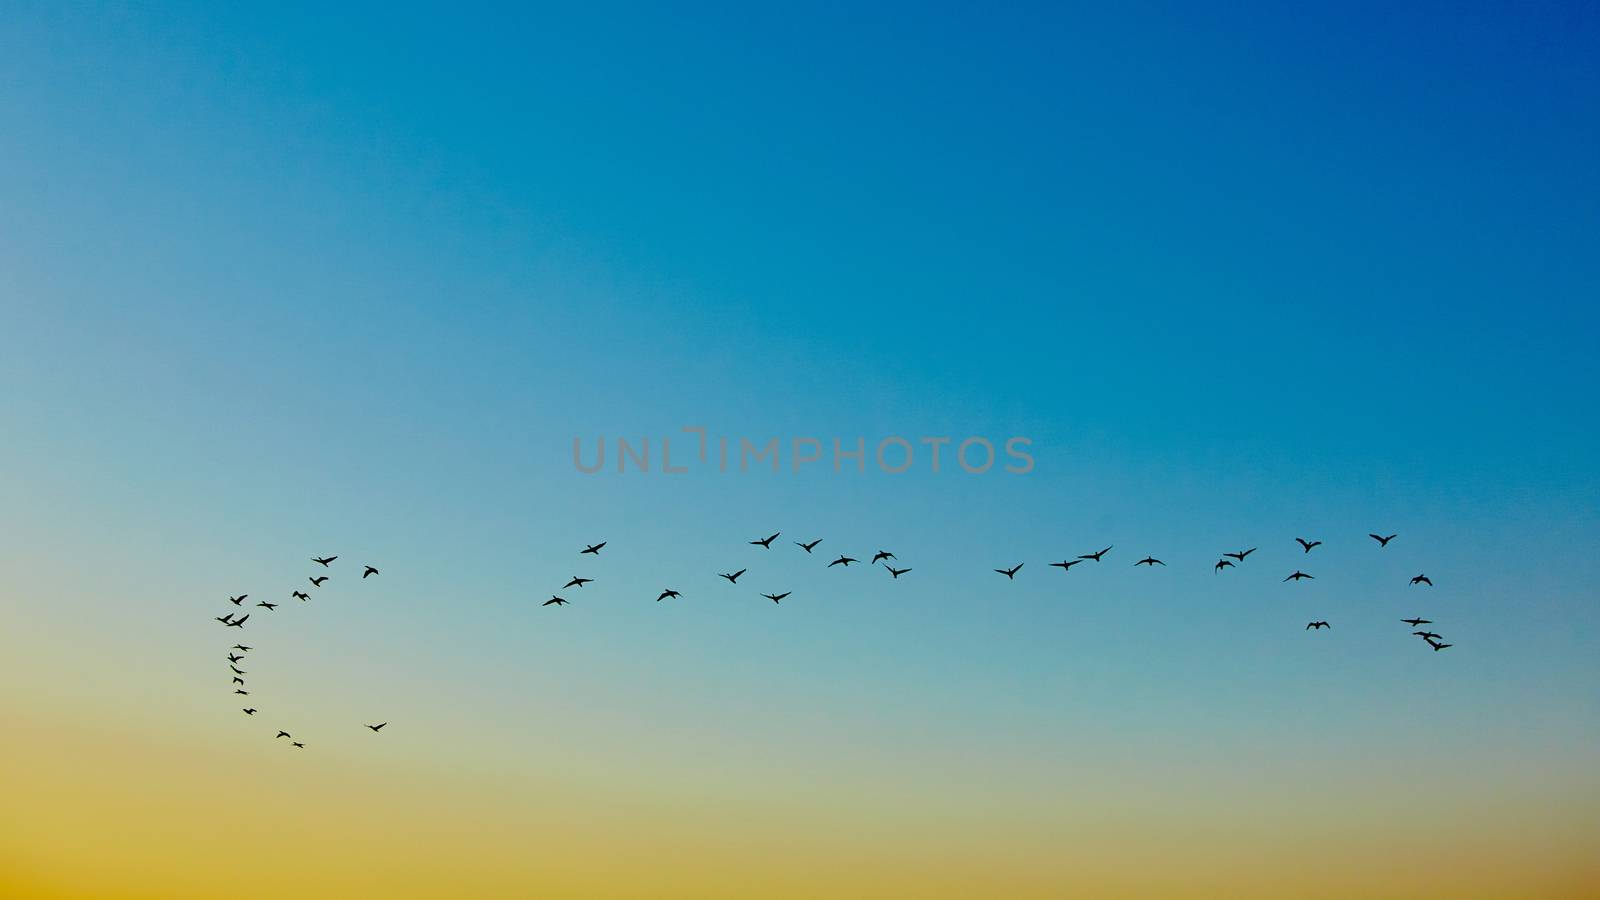 the silhouettes flying birds on sunset background 